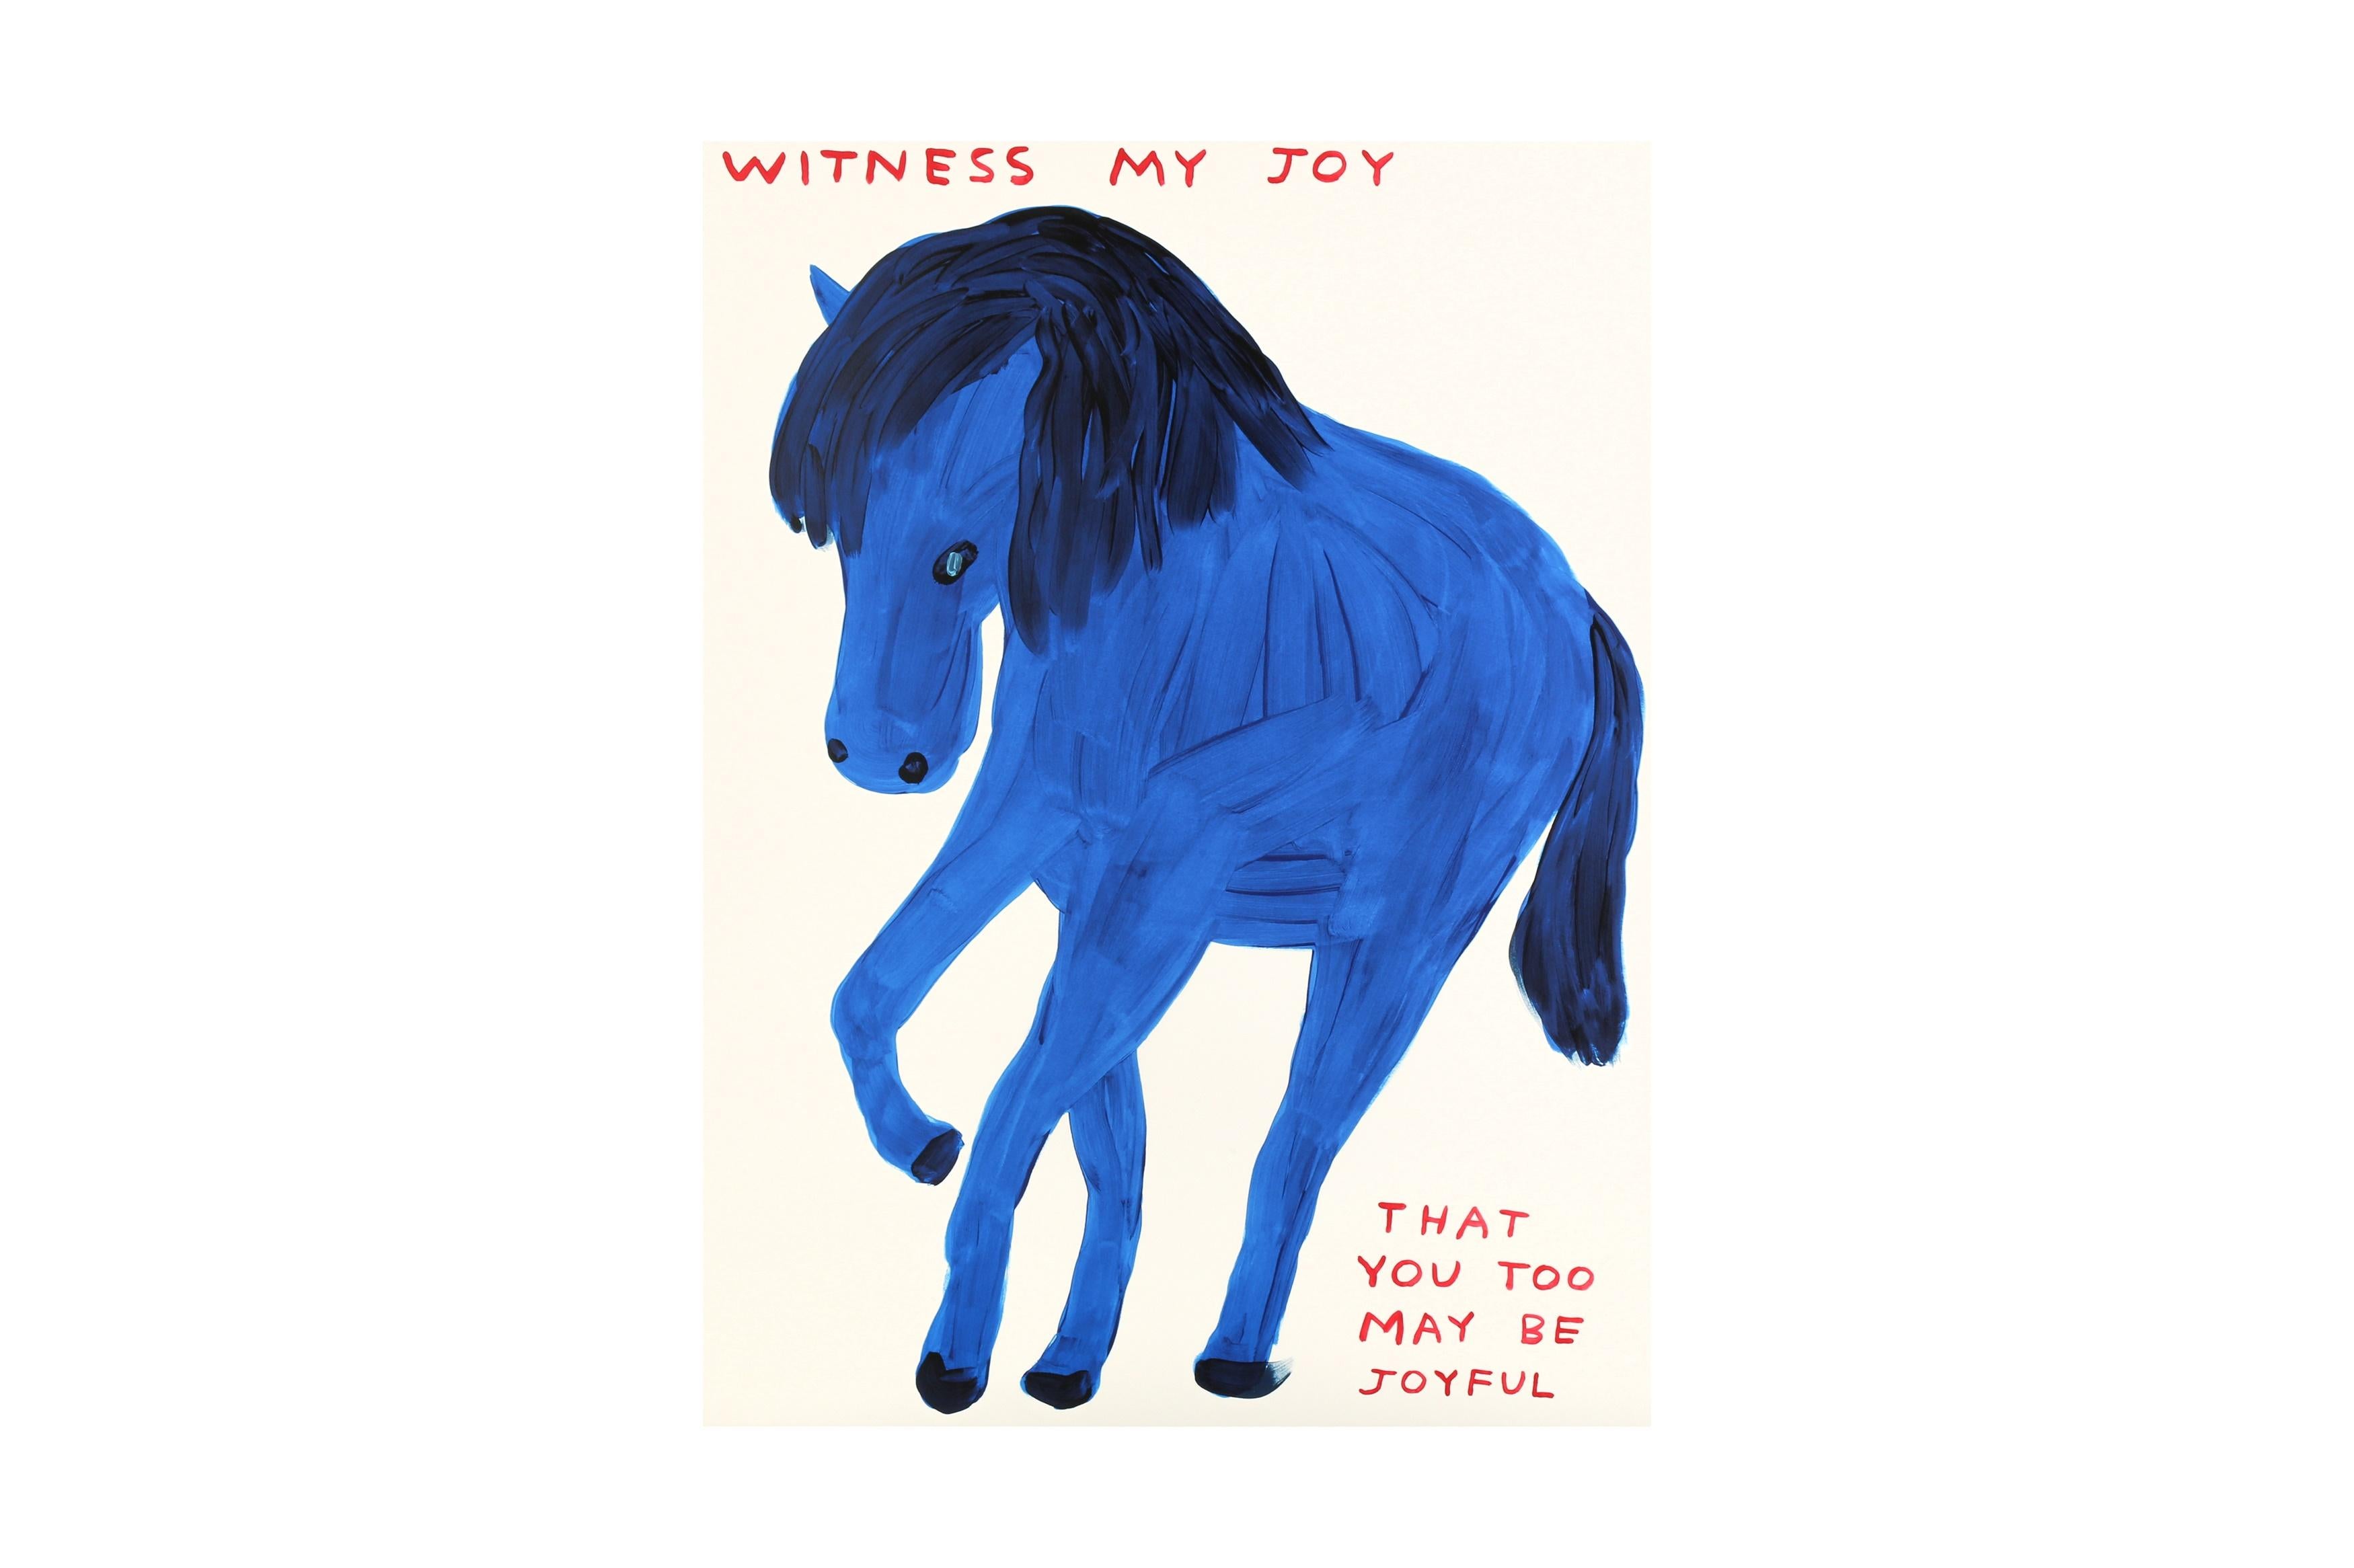 DAVID SHRIGLEY
Witness my Joy
Screenprint in colours on 410gsm Somerset wove
Hand Signed, dated  verso
Edition 9 / 125 in pencil verso
Published by Galleri Nicolai Wallner
Sheet 75 x 56cm
Excellent condition with the original package